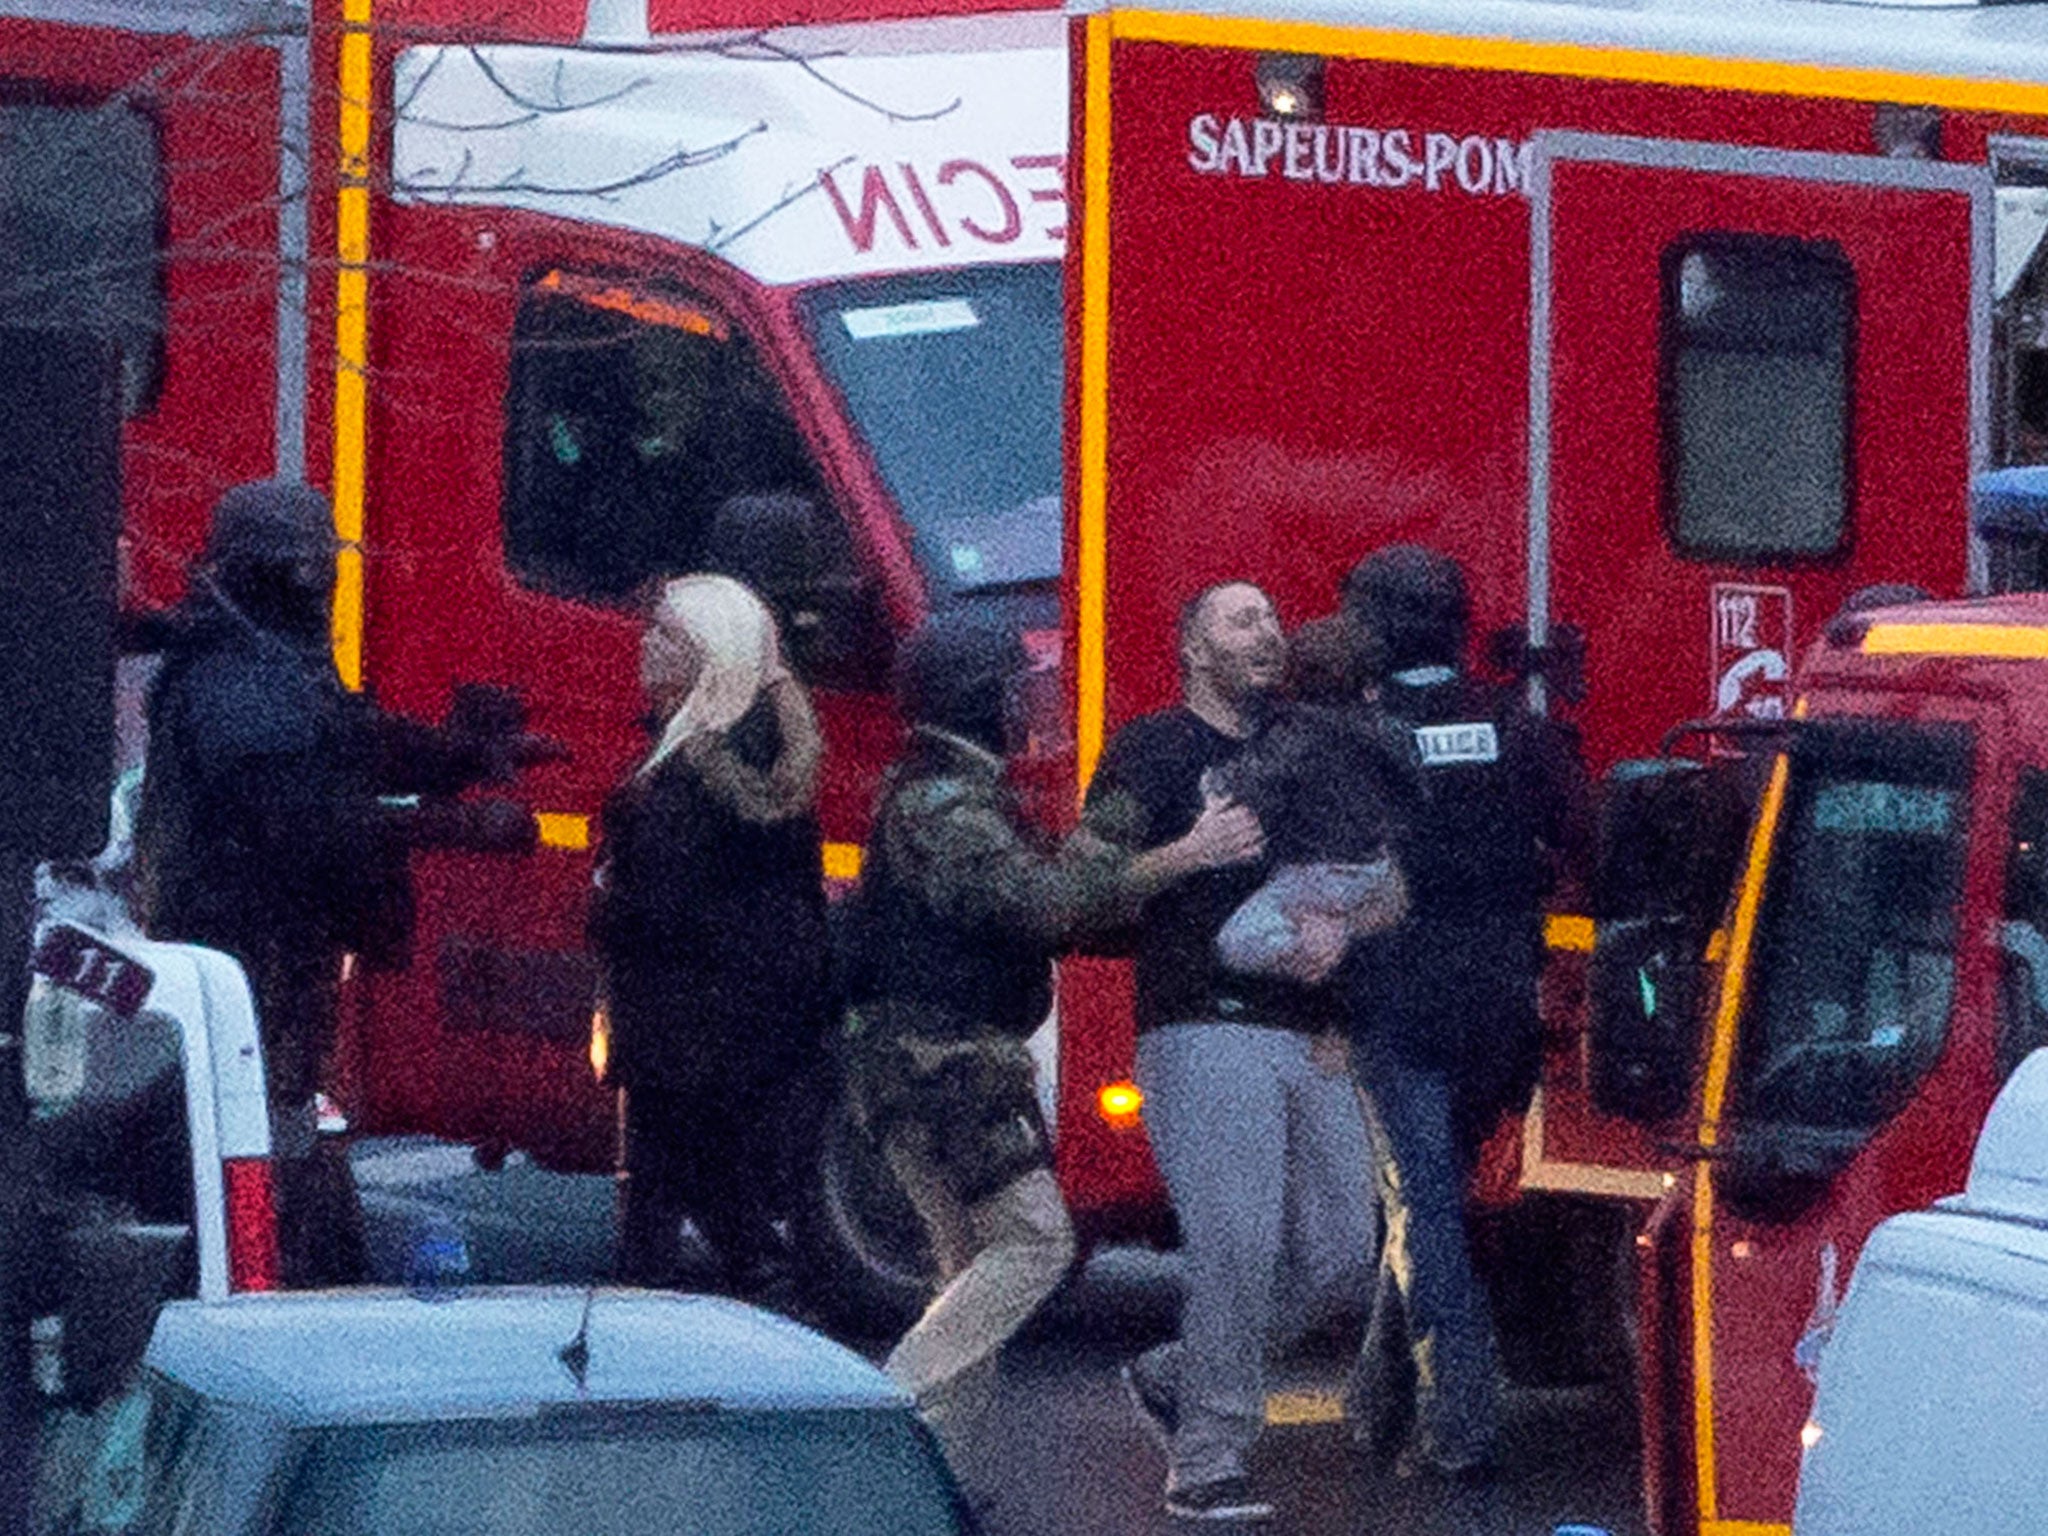 A security officer directs released hostages after they stormed a kosher market to end a hostage situation